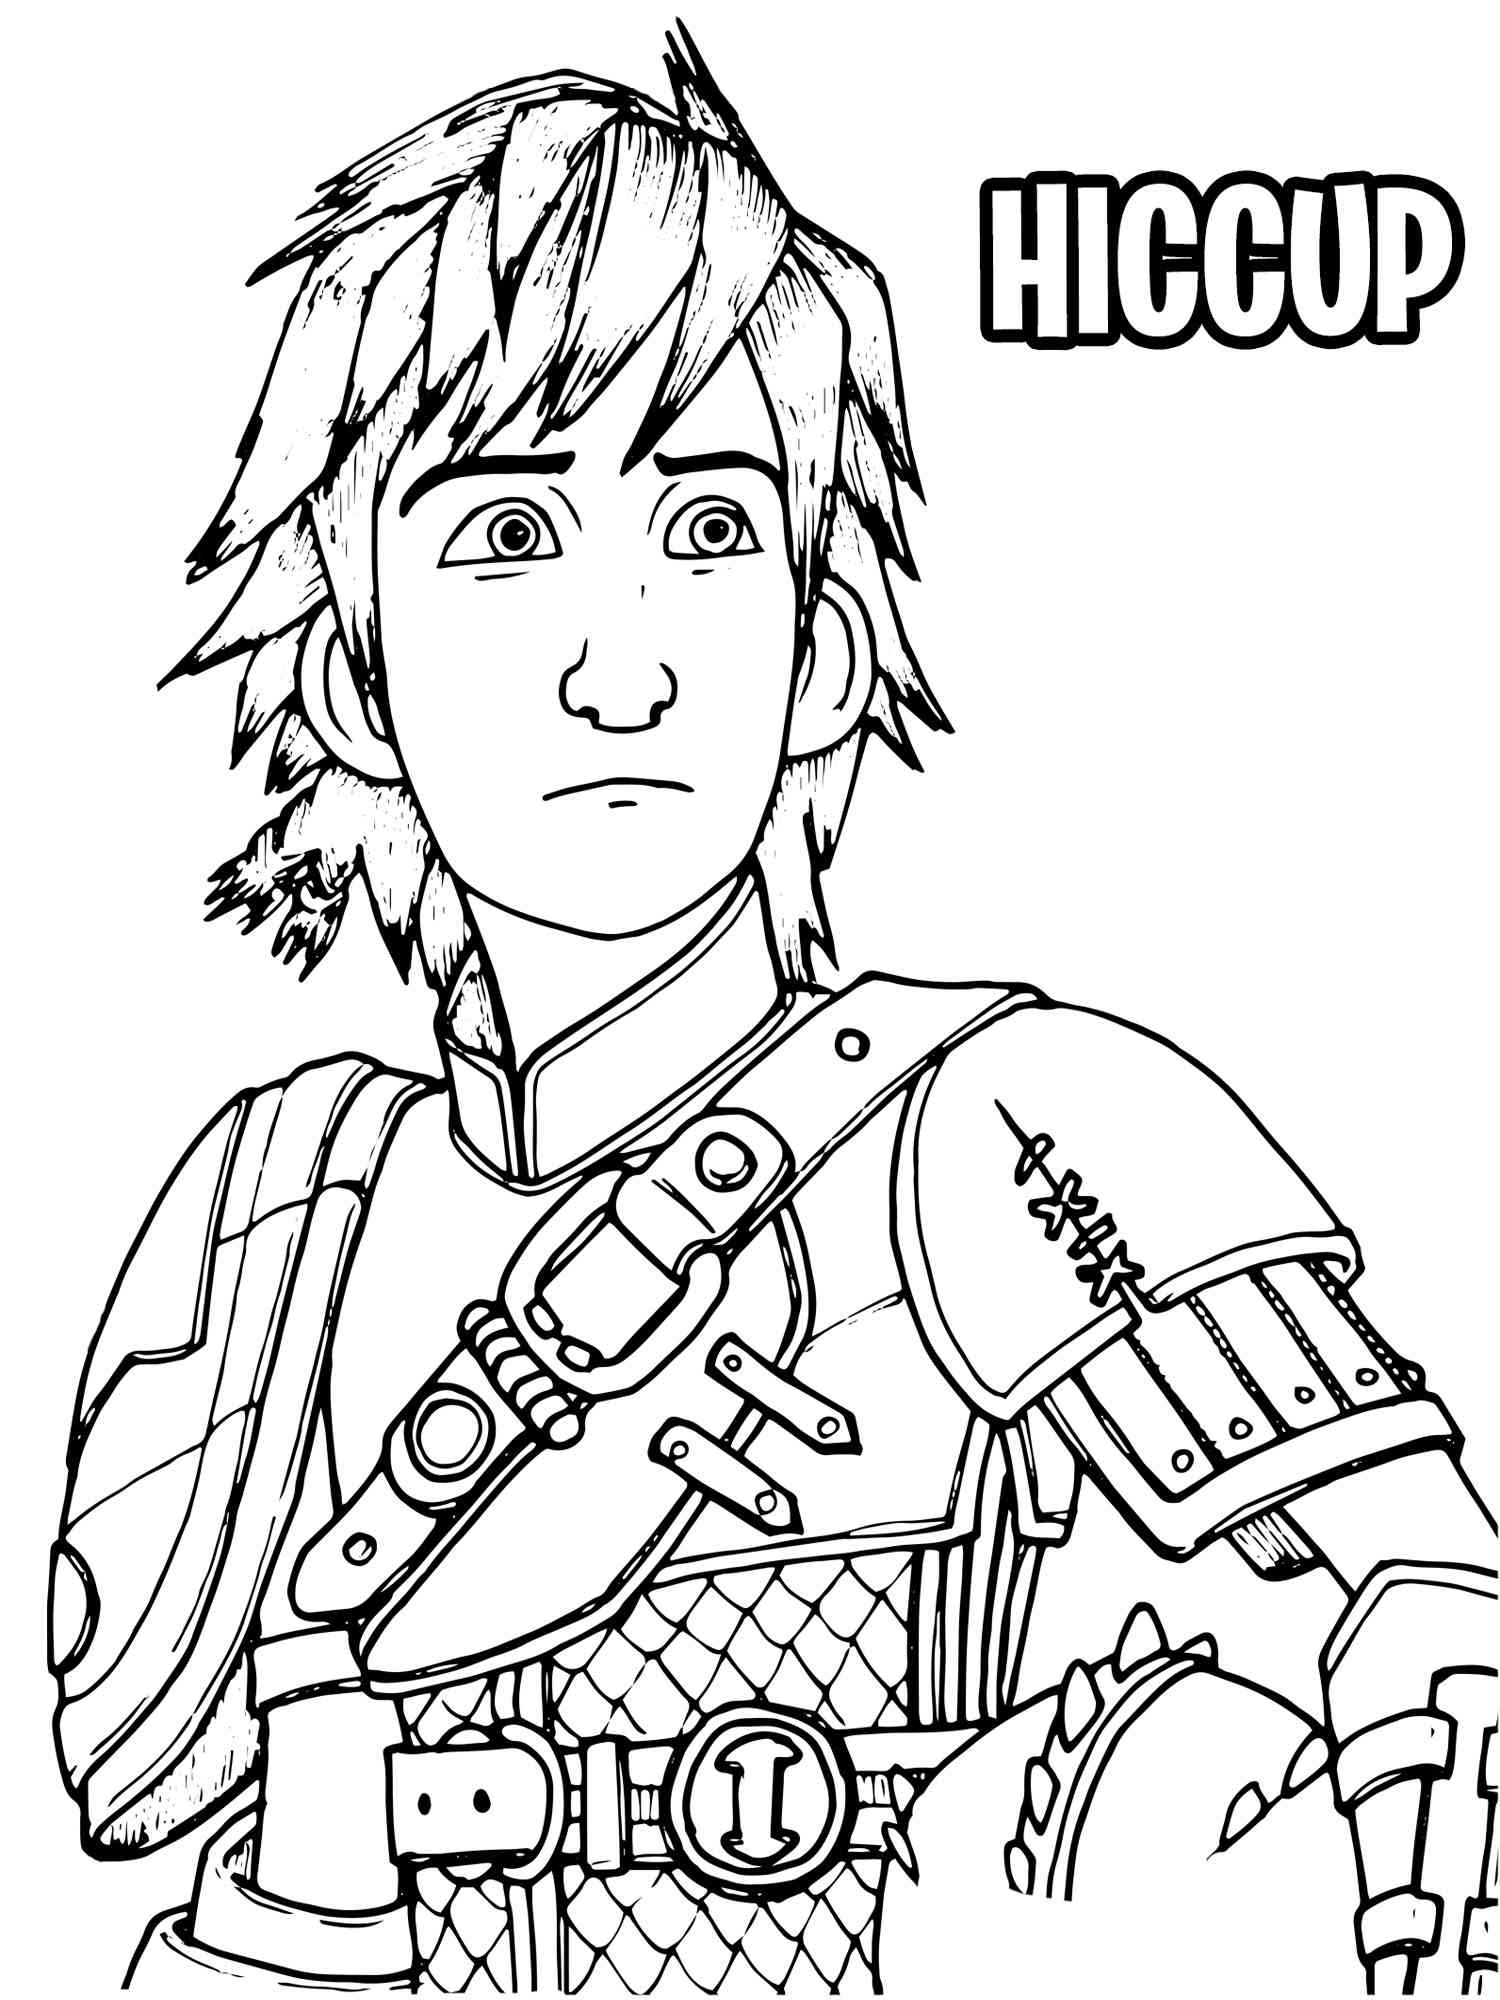 Hiccup 6 coloring page